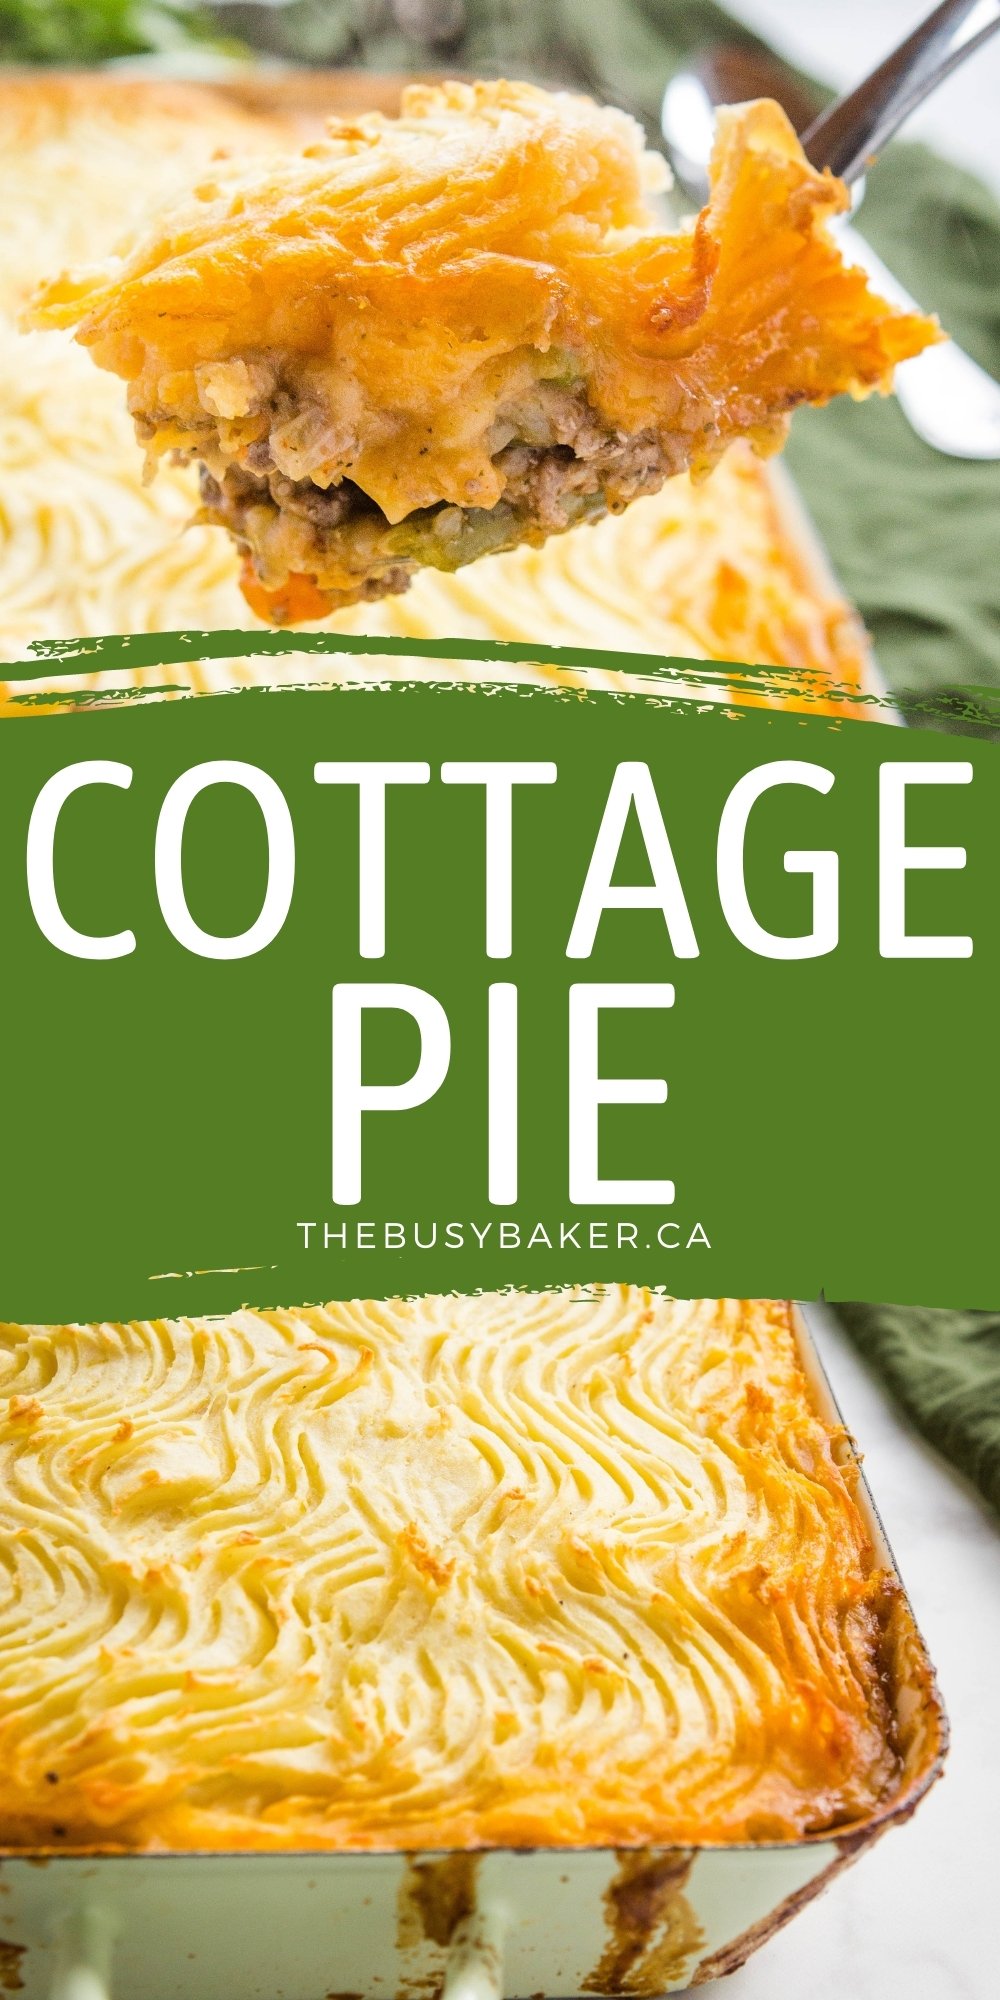 This Easy Homemade Cottage Pie is a classic comfort food recipe featuring juicy beef and veggies in a savoury gravy, and topped with crispy mashed potatoes! Easy to make and the perfect family meal! Recipe from thebusybaker.ca! #shepherdspie #cottagepie #british #comfortfood #dinner #mealidea #easydinner #easymeal #familymeal via @busybakerblog